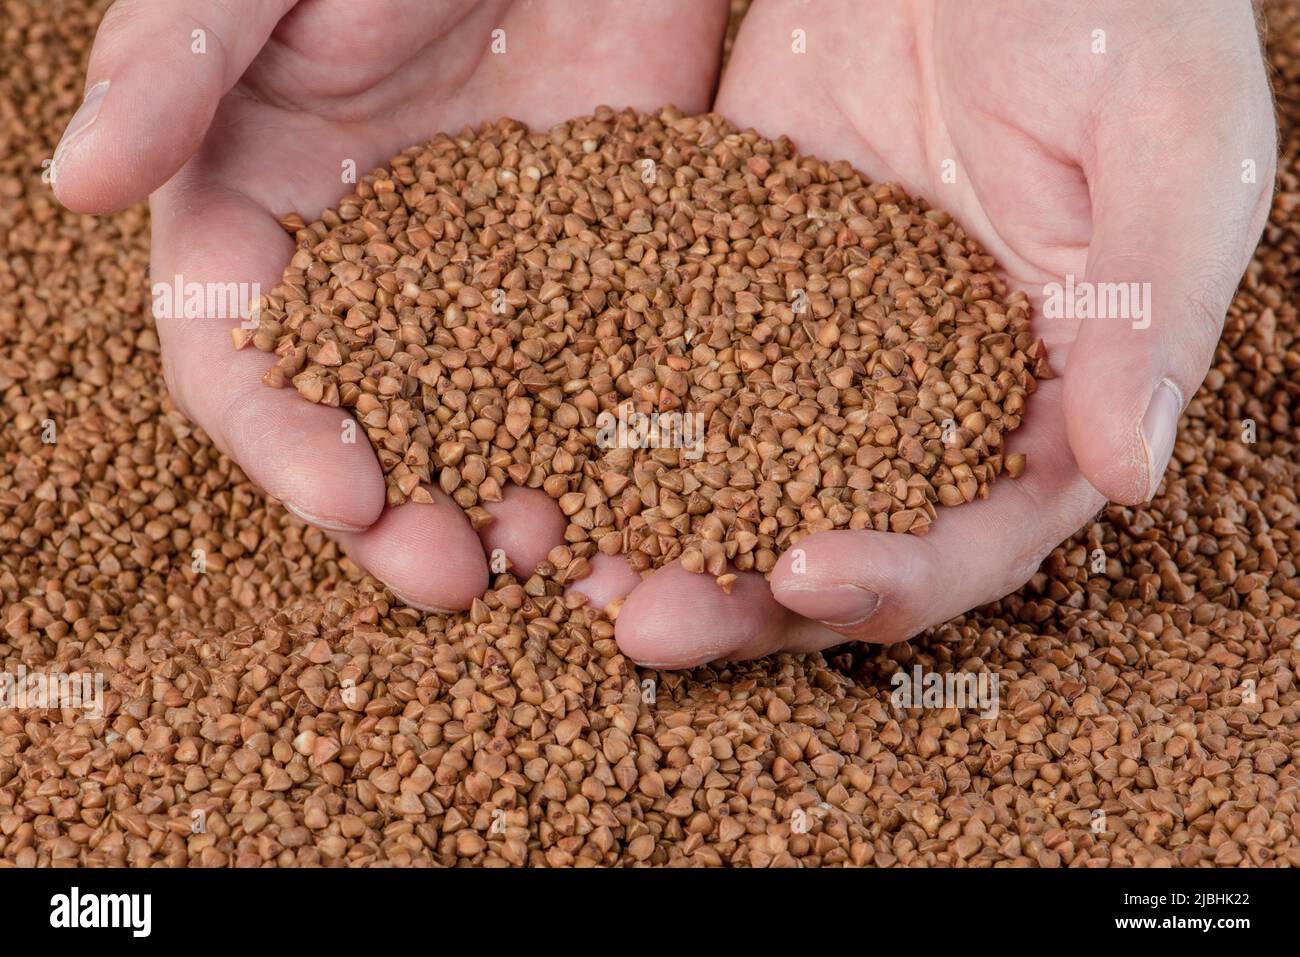 Buckwheat background, texture of buckwheat groats. Roasted buckwheat in the hands. Concept of food crisis, bad harvest, lack of food, famine. Stock Photo